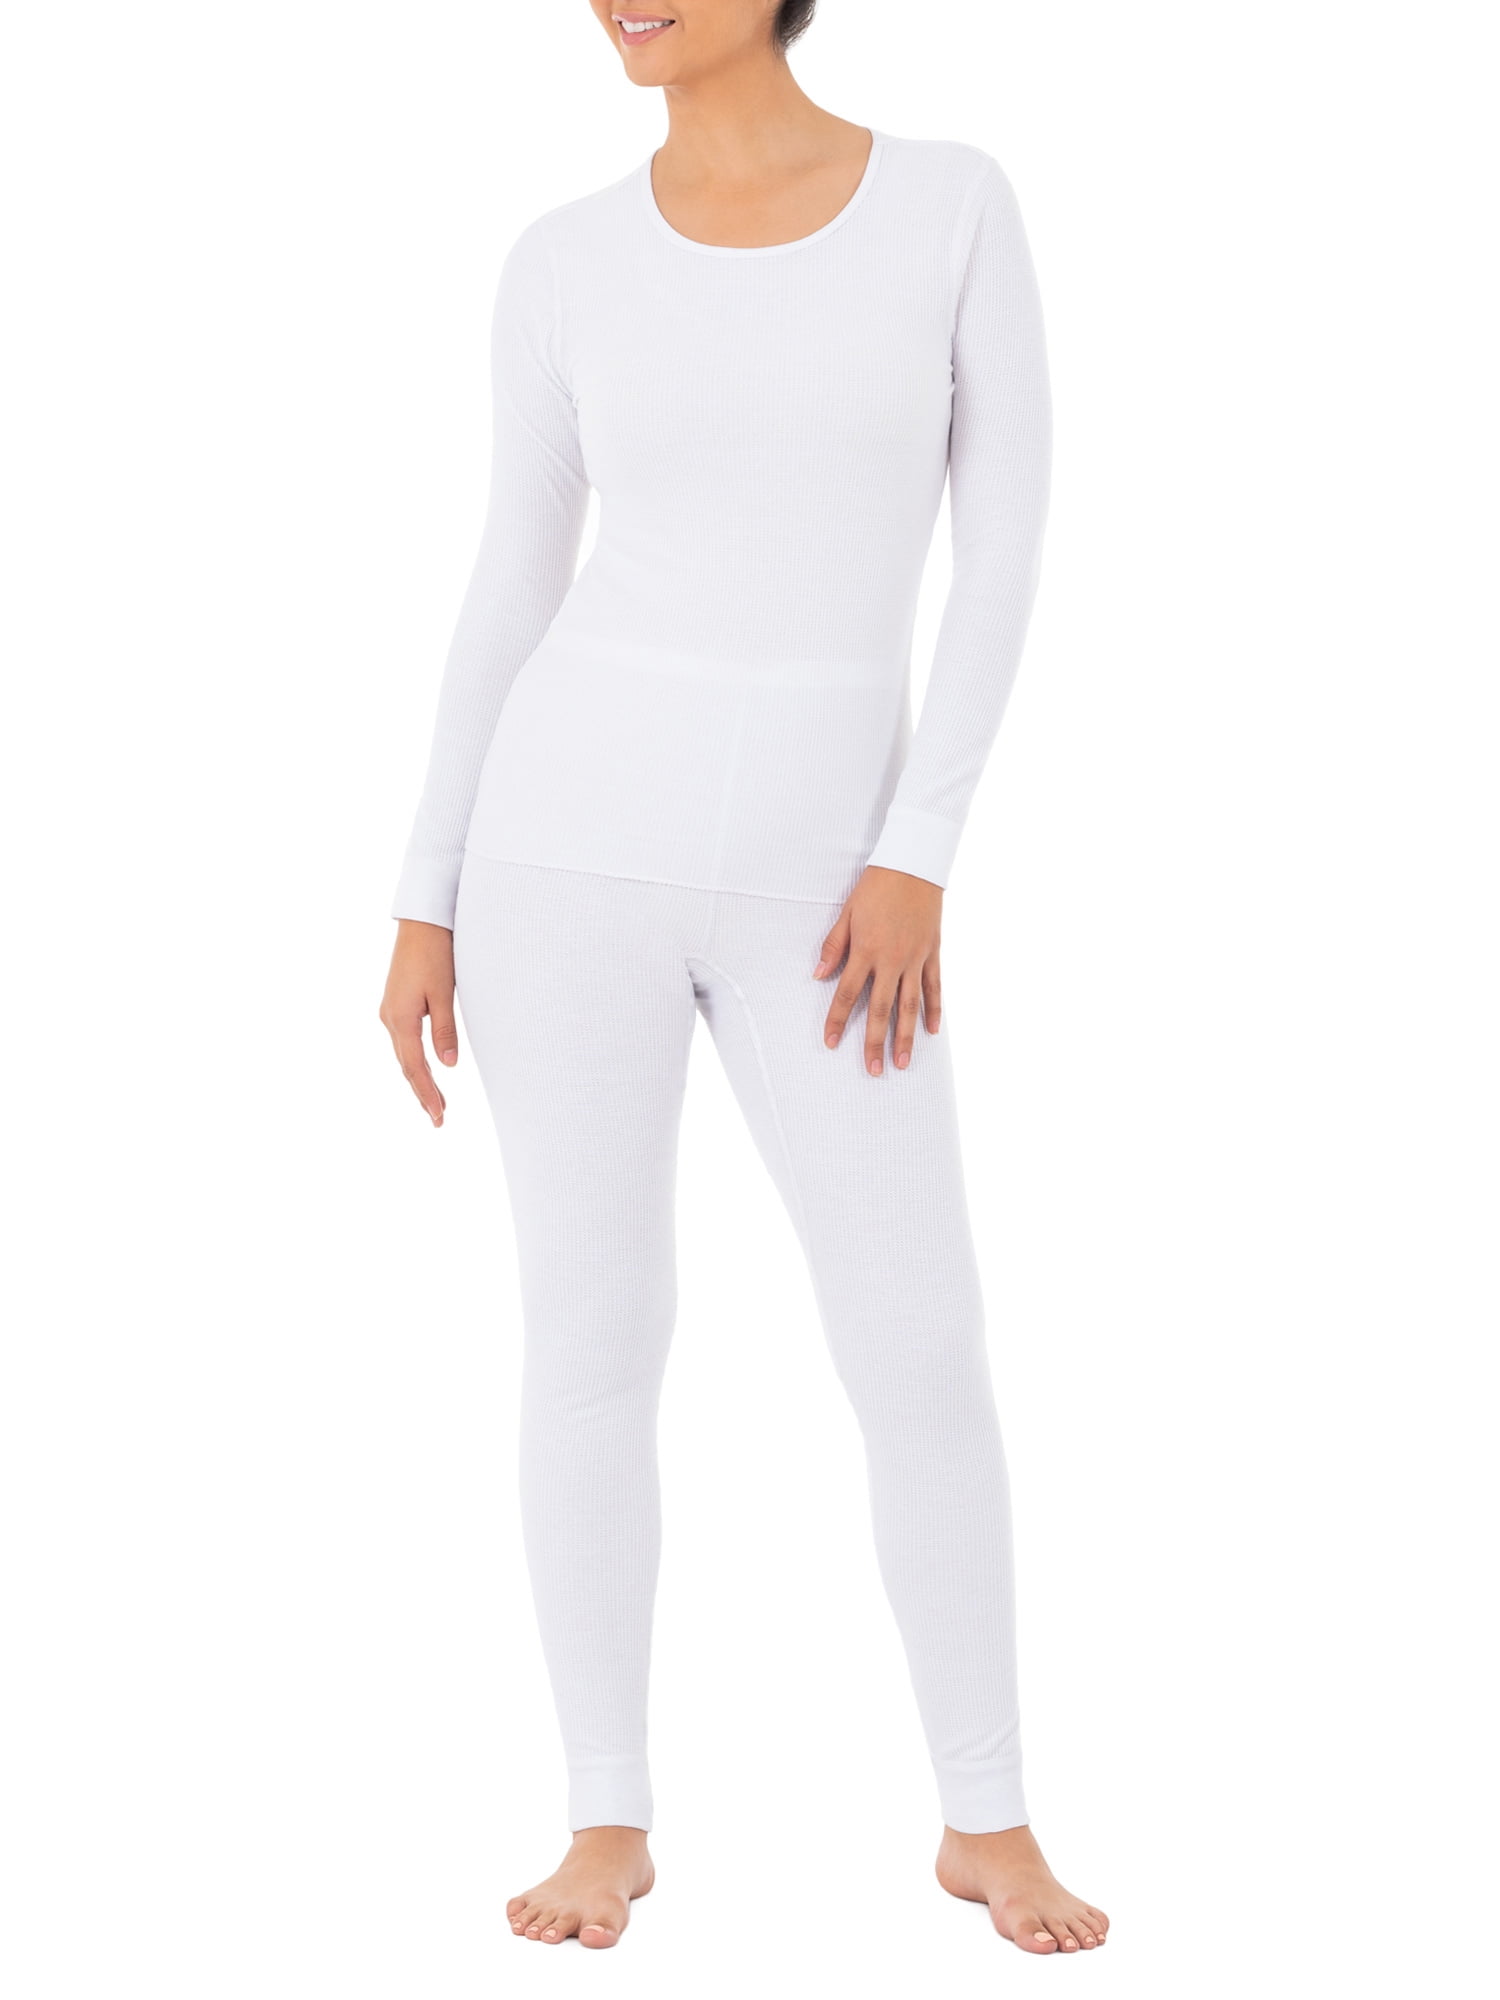 Fruit of the Loom Women's and Women's Plus Long Underwear Thermal ...